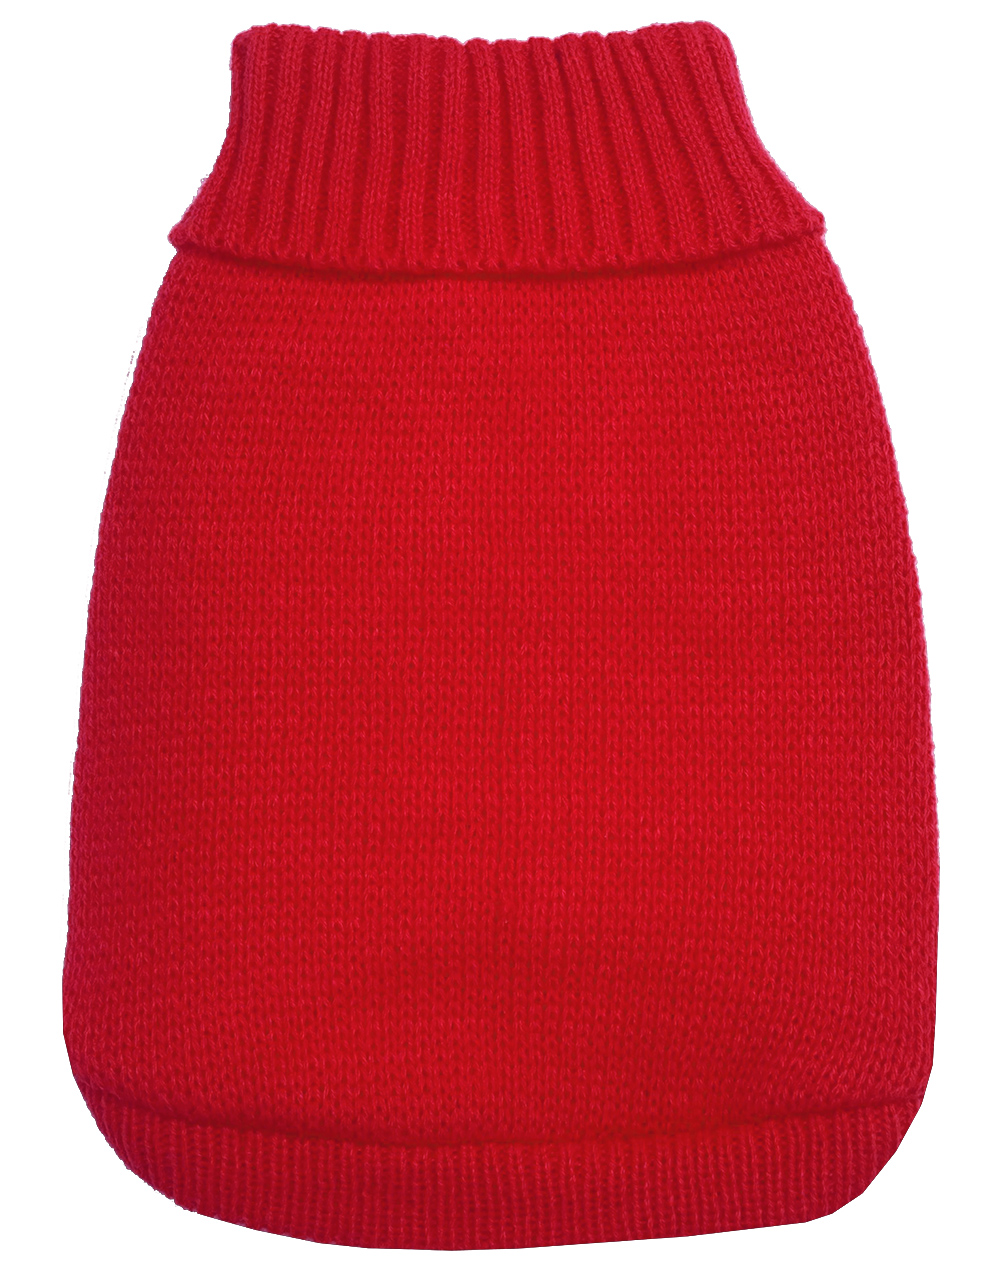 Knit Pet Sweater Red Size 4X